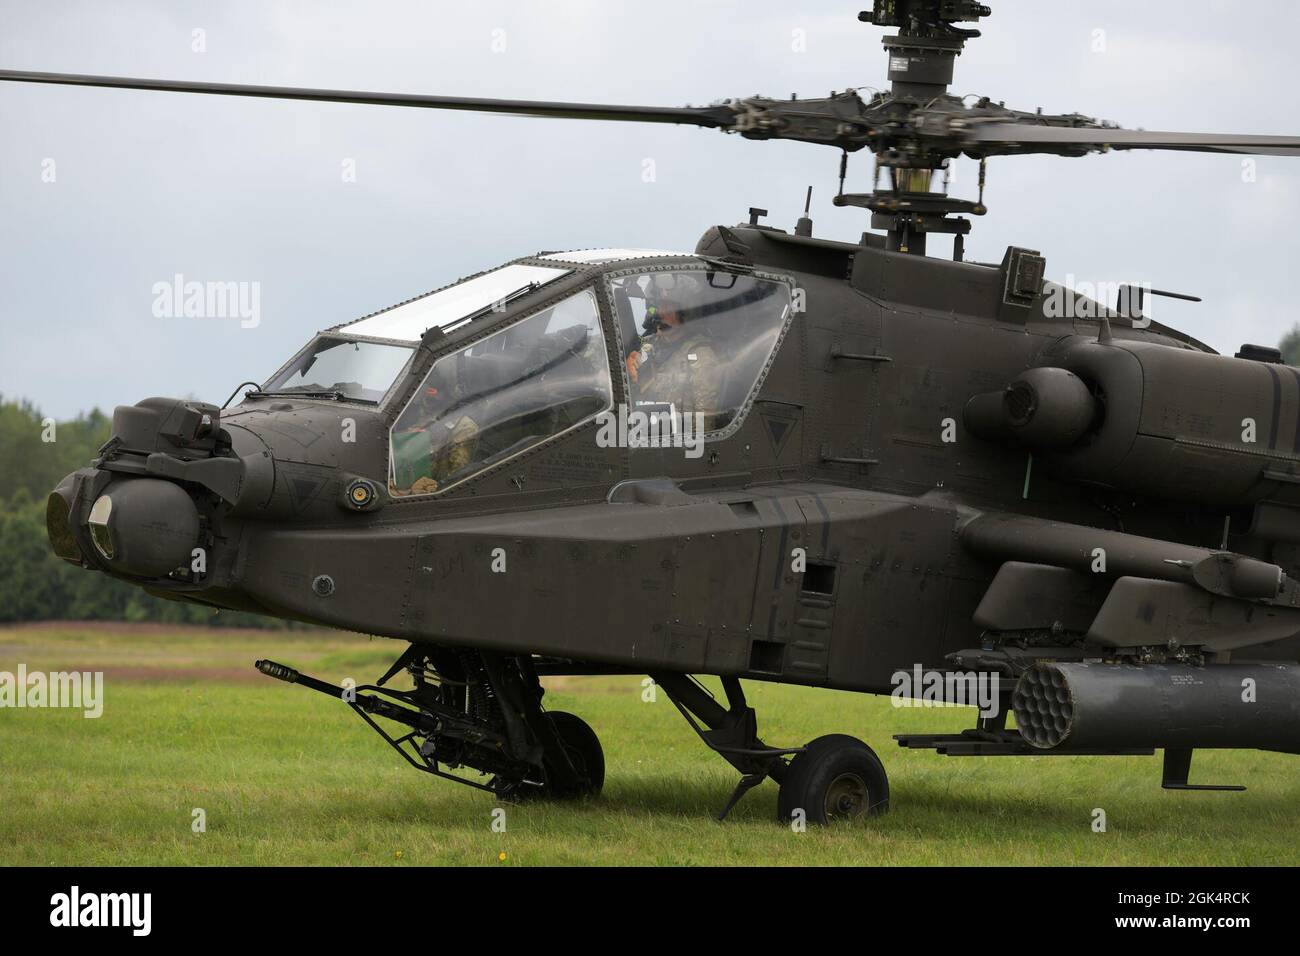 U.S. Soldiers, assigned to 1st Combat Aviation Brigade, 1st Infantry Division, perform system readiness checks on a AH-64D Apache Longbow attack helicopter prior to taking off during aerial gunnery training at the 7th Army Training Command's Grafenwoehr Training Area, Germany, Aug. 4, 2021. Stock Photo